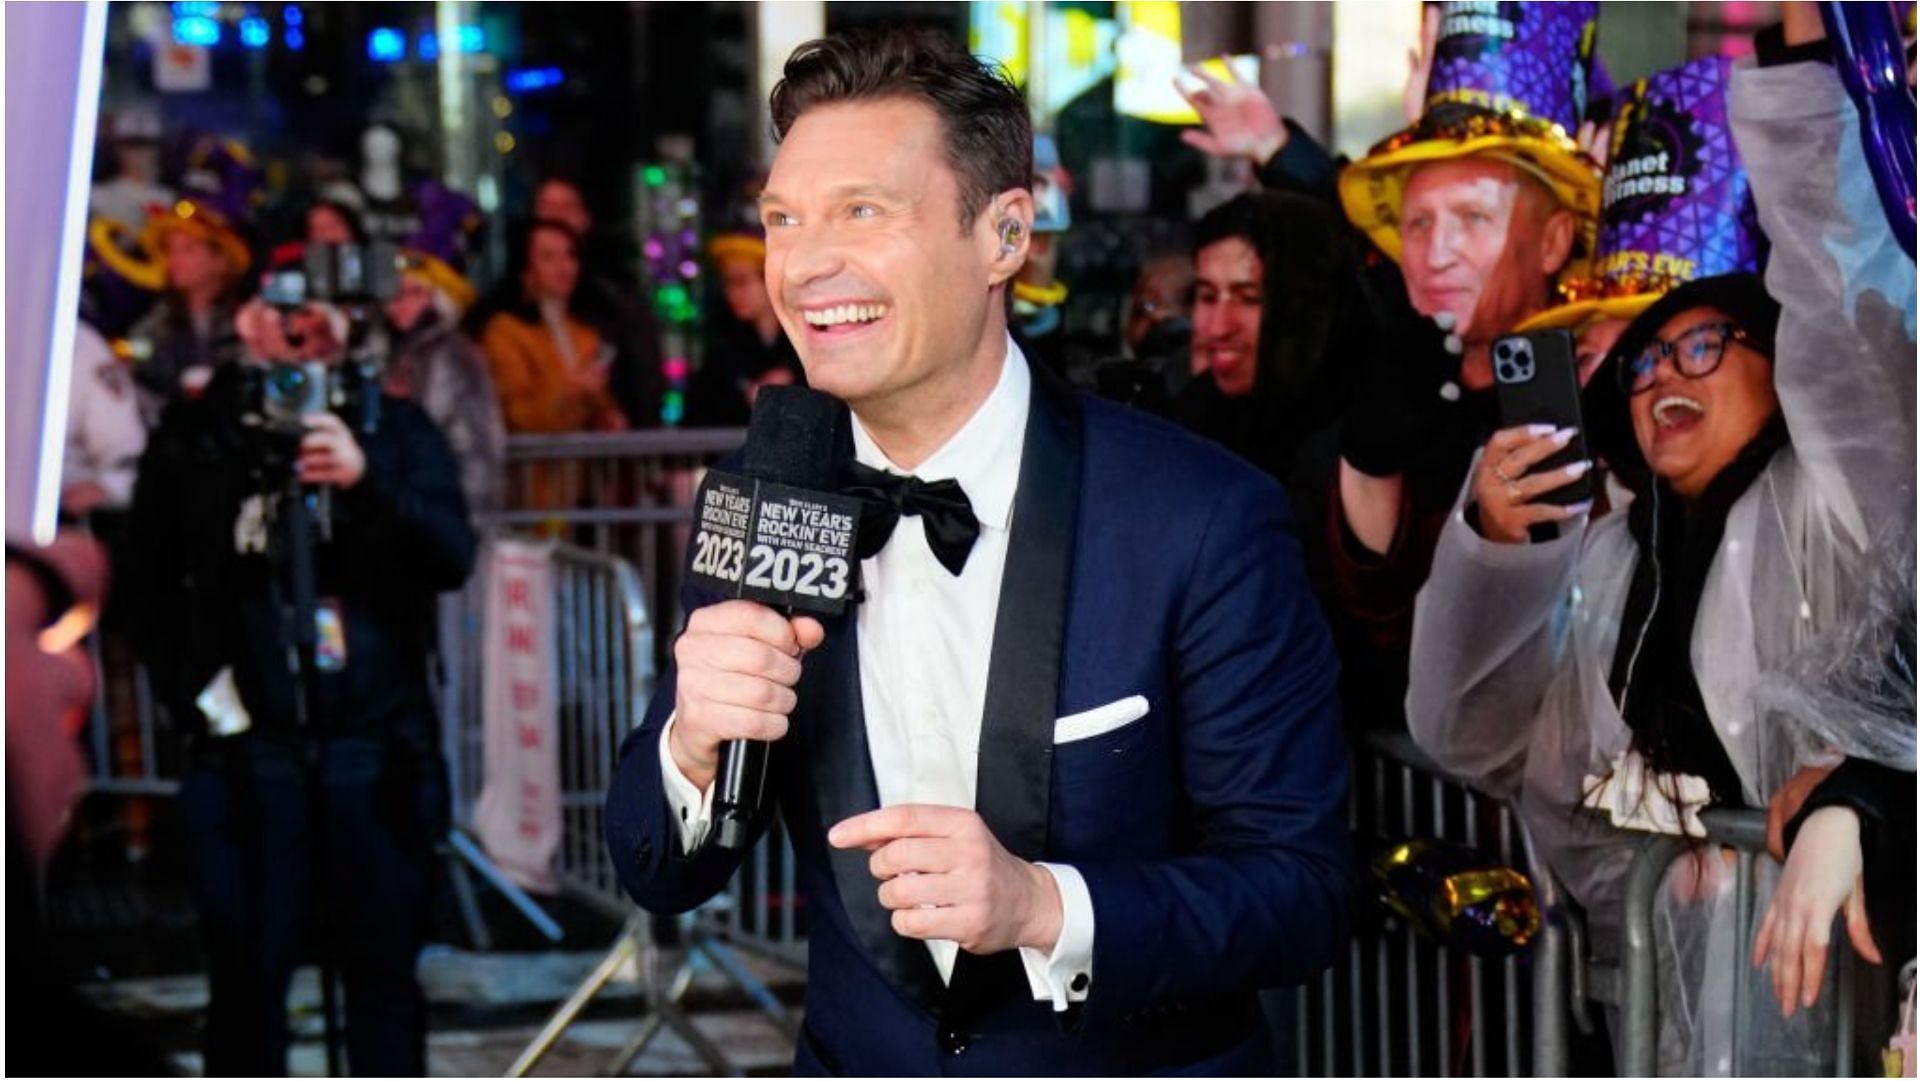 Ryan Seacrest has recently announced his exit from Live with Kelly and Ryan (Image via Gotham/Getty Images)